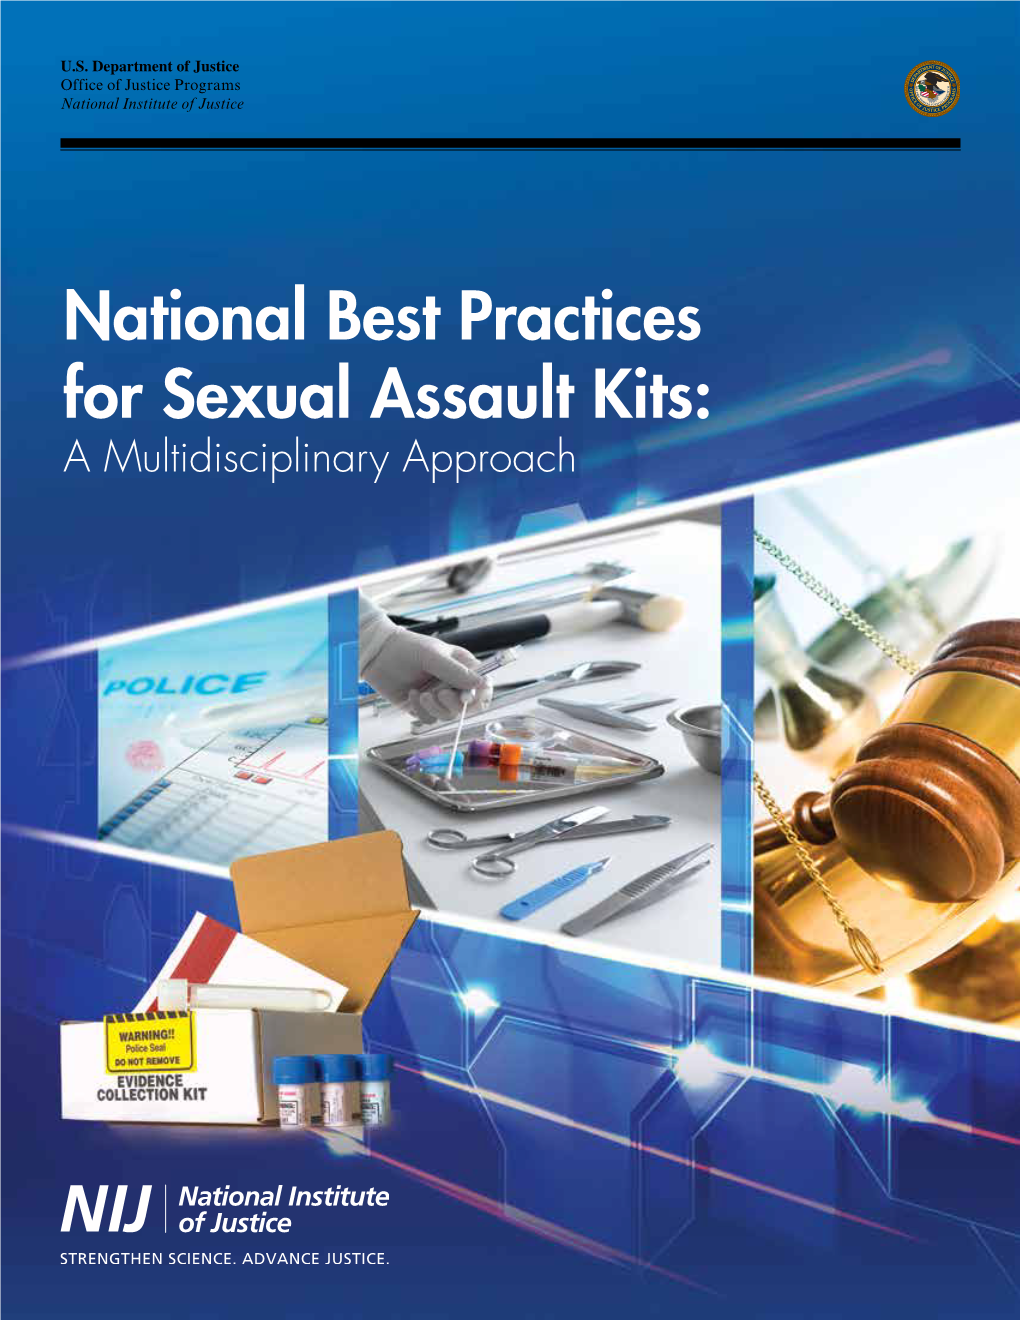 National Best Practices for Sexual Assault Kits: a Multidisciplinary Approach